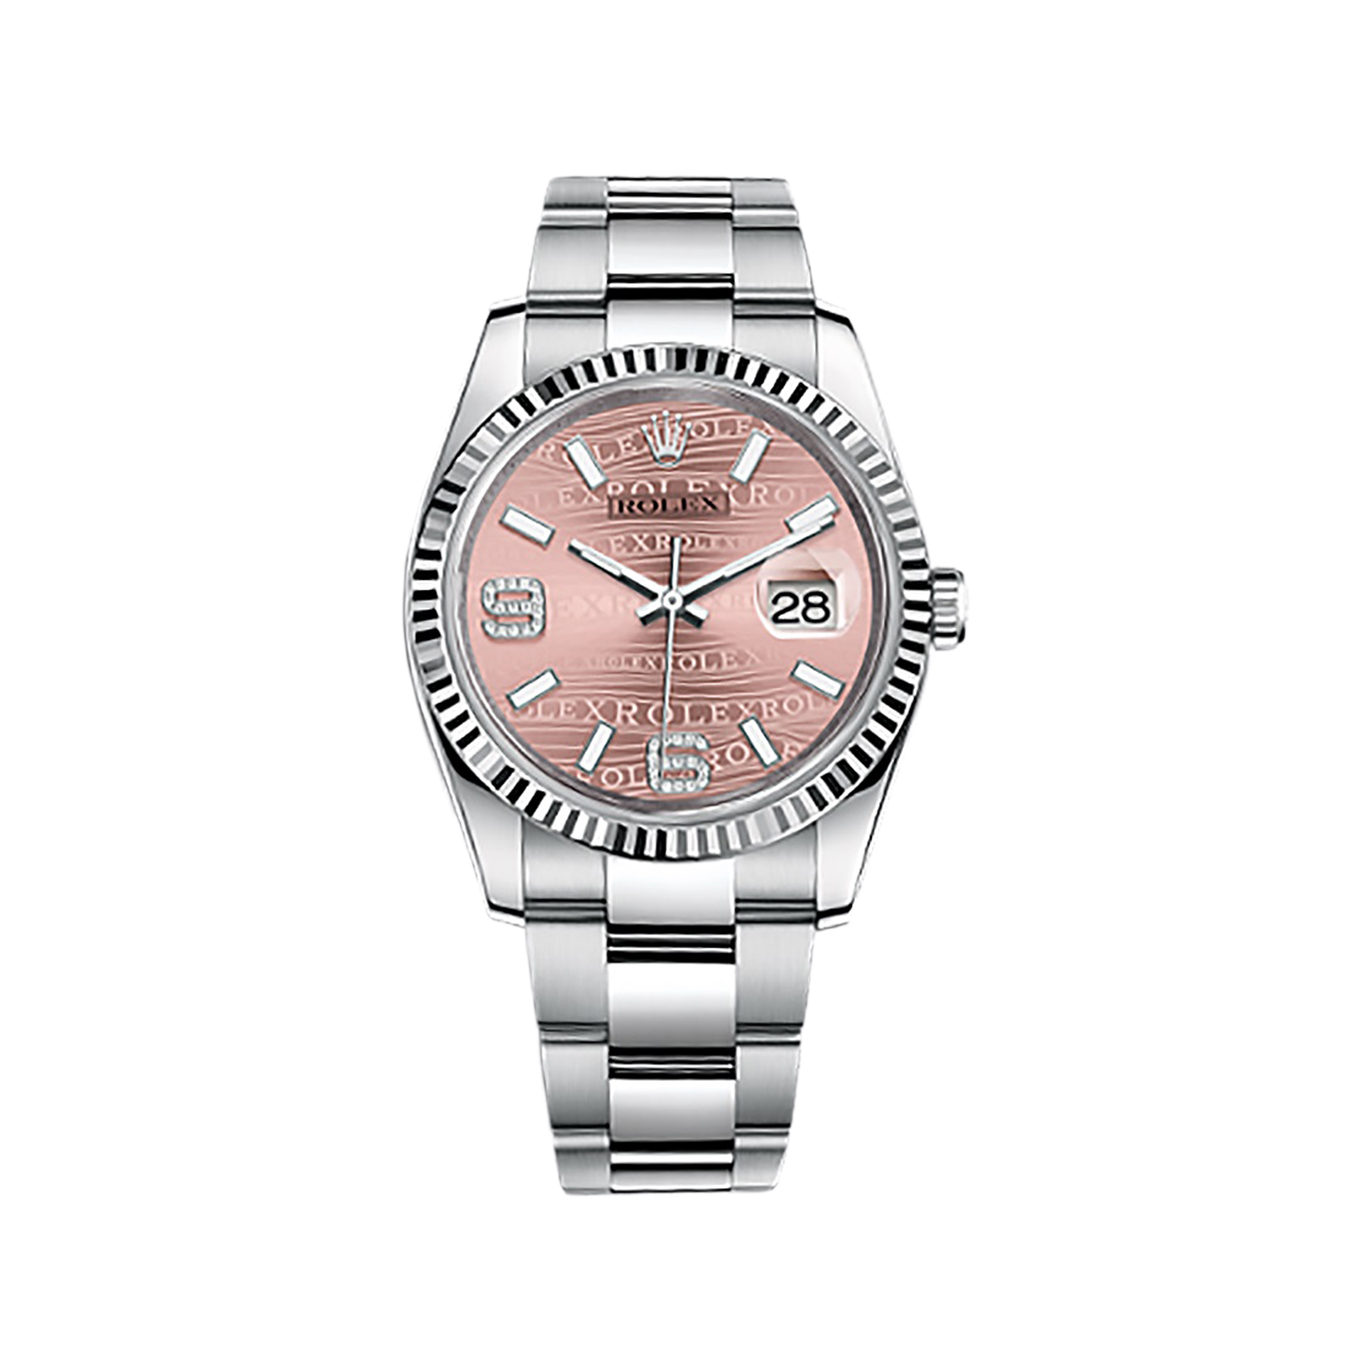 Datejust 36 116234 White Gold & Stainless Steel Watch (Pink Waves Set with Diamonds) - Click Image to Close